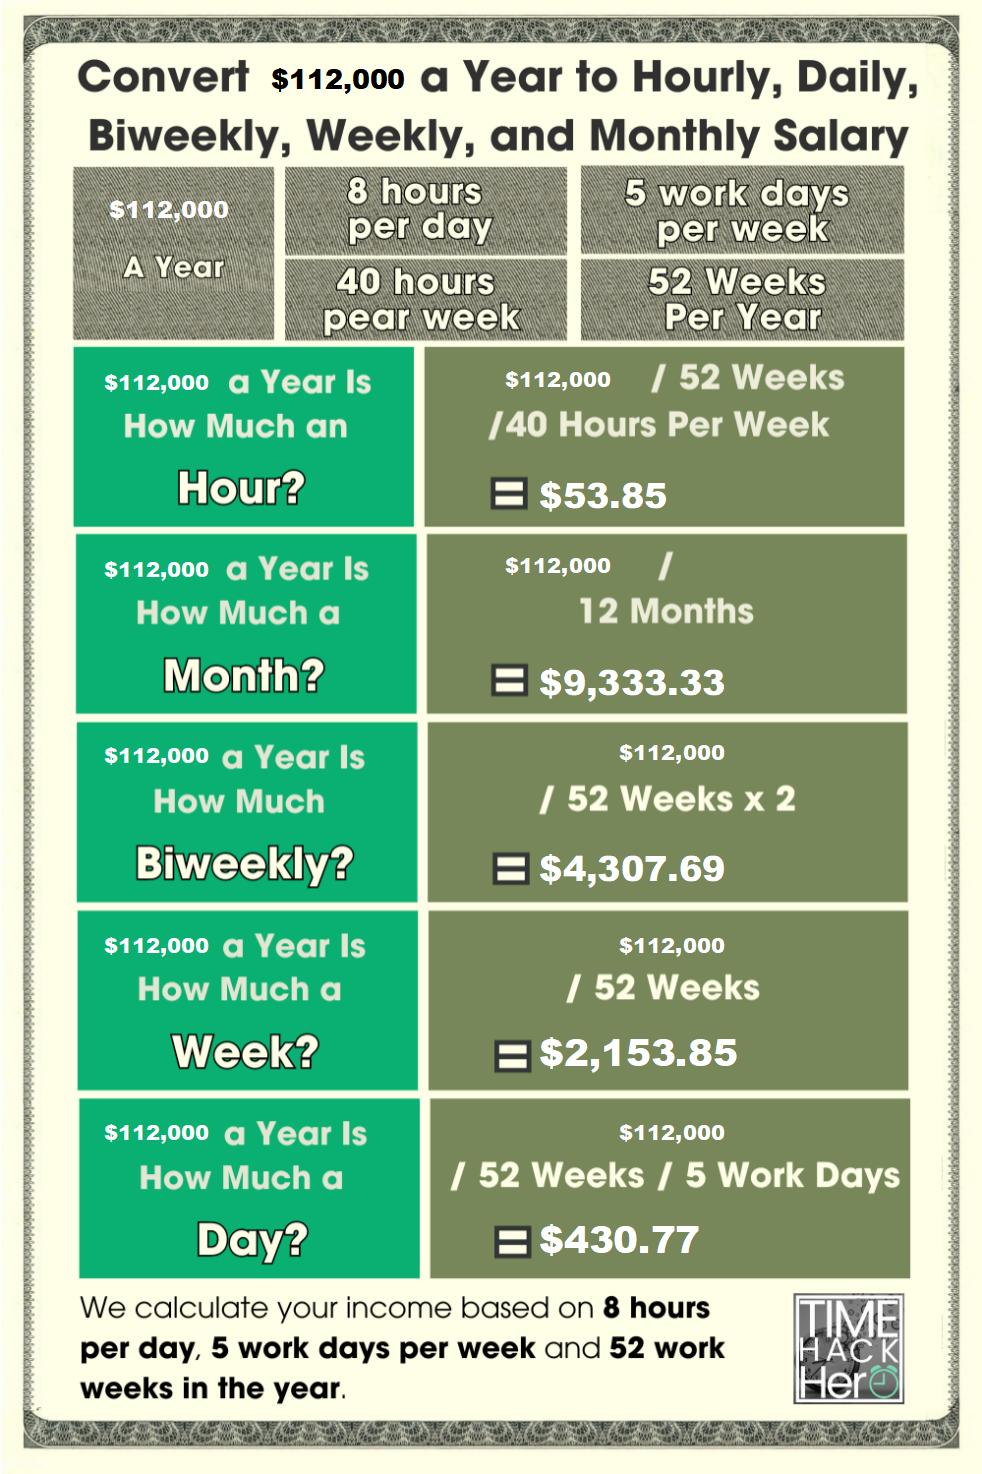 Convert $112000 a Year to Hourly, Daily, Biweekly, Weekly, and Monthly Salary